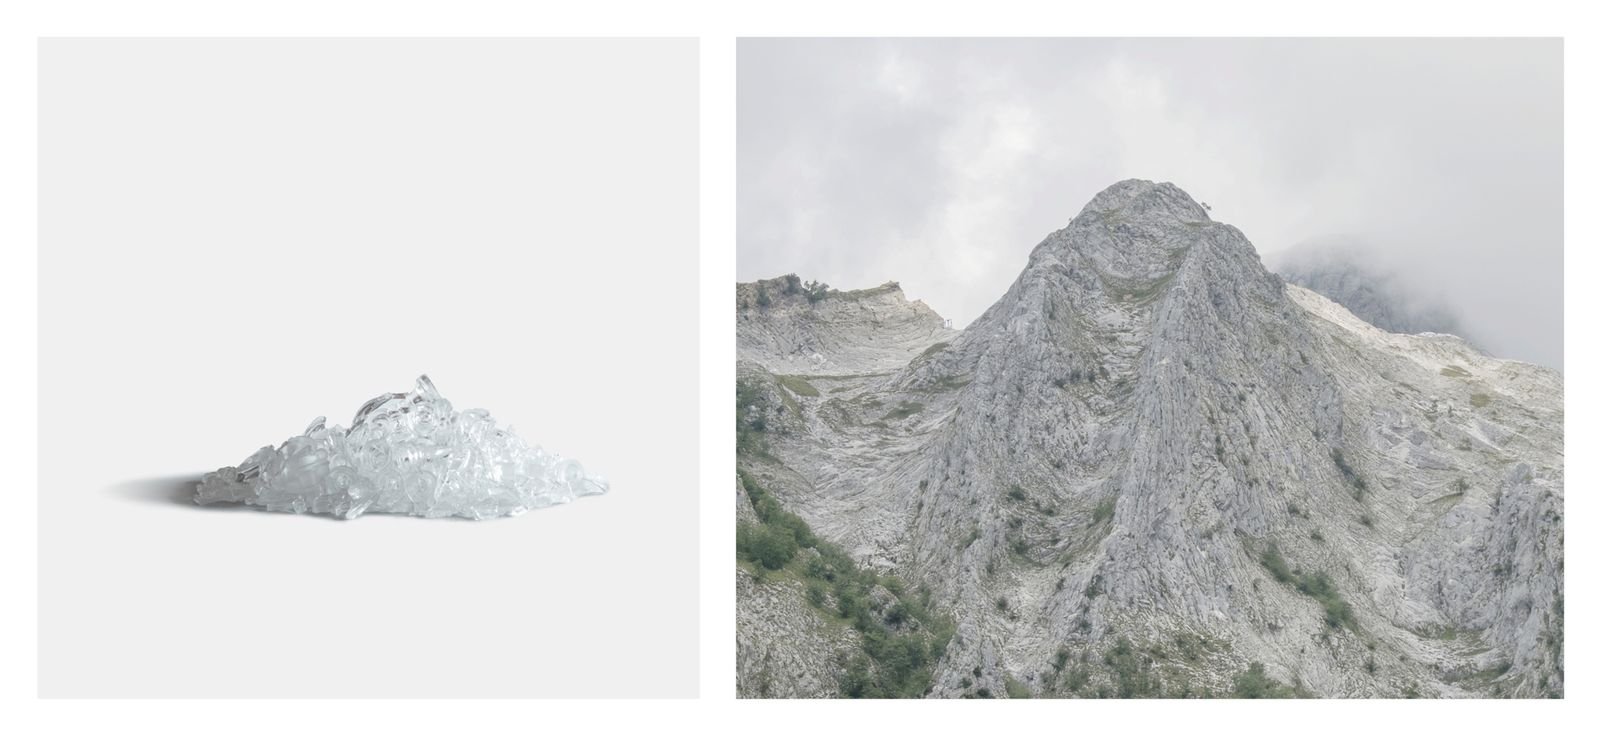 © Andrea Foligni - Image from the Apuan carbonate photography project